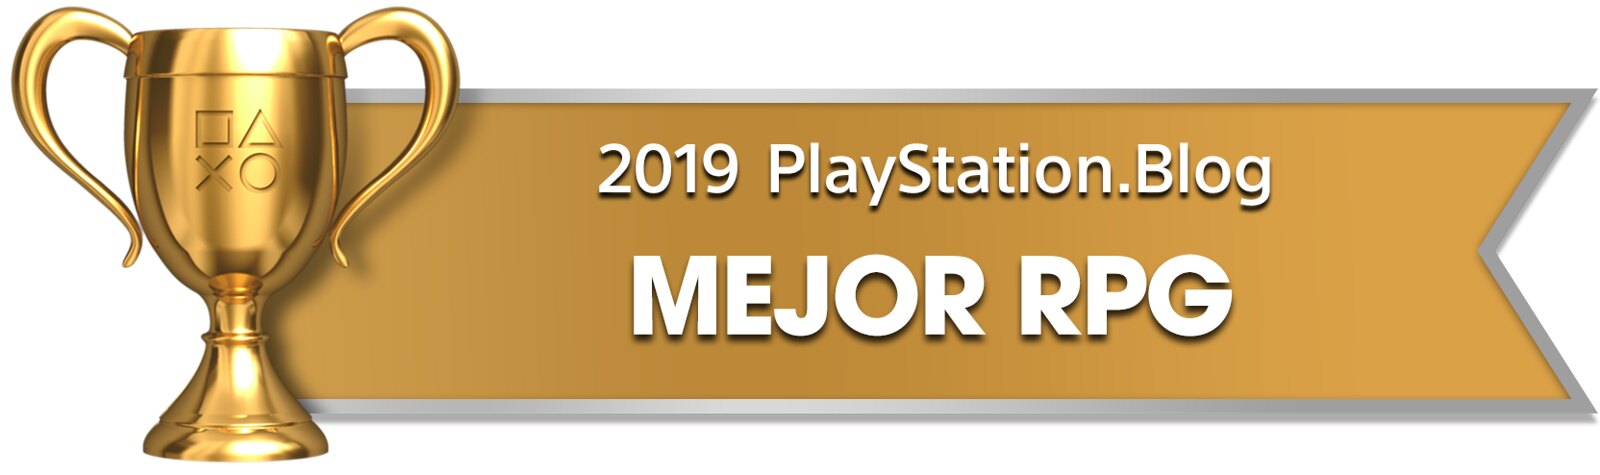 PS Blog Game of the Year 2019 - Best Role-Playing Game - 2 - Gold